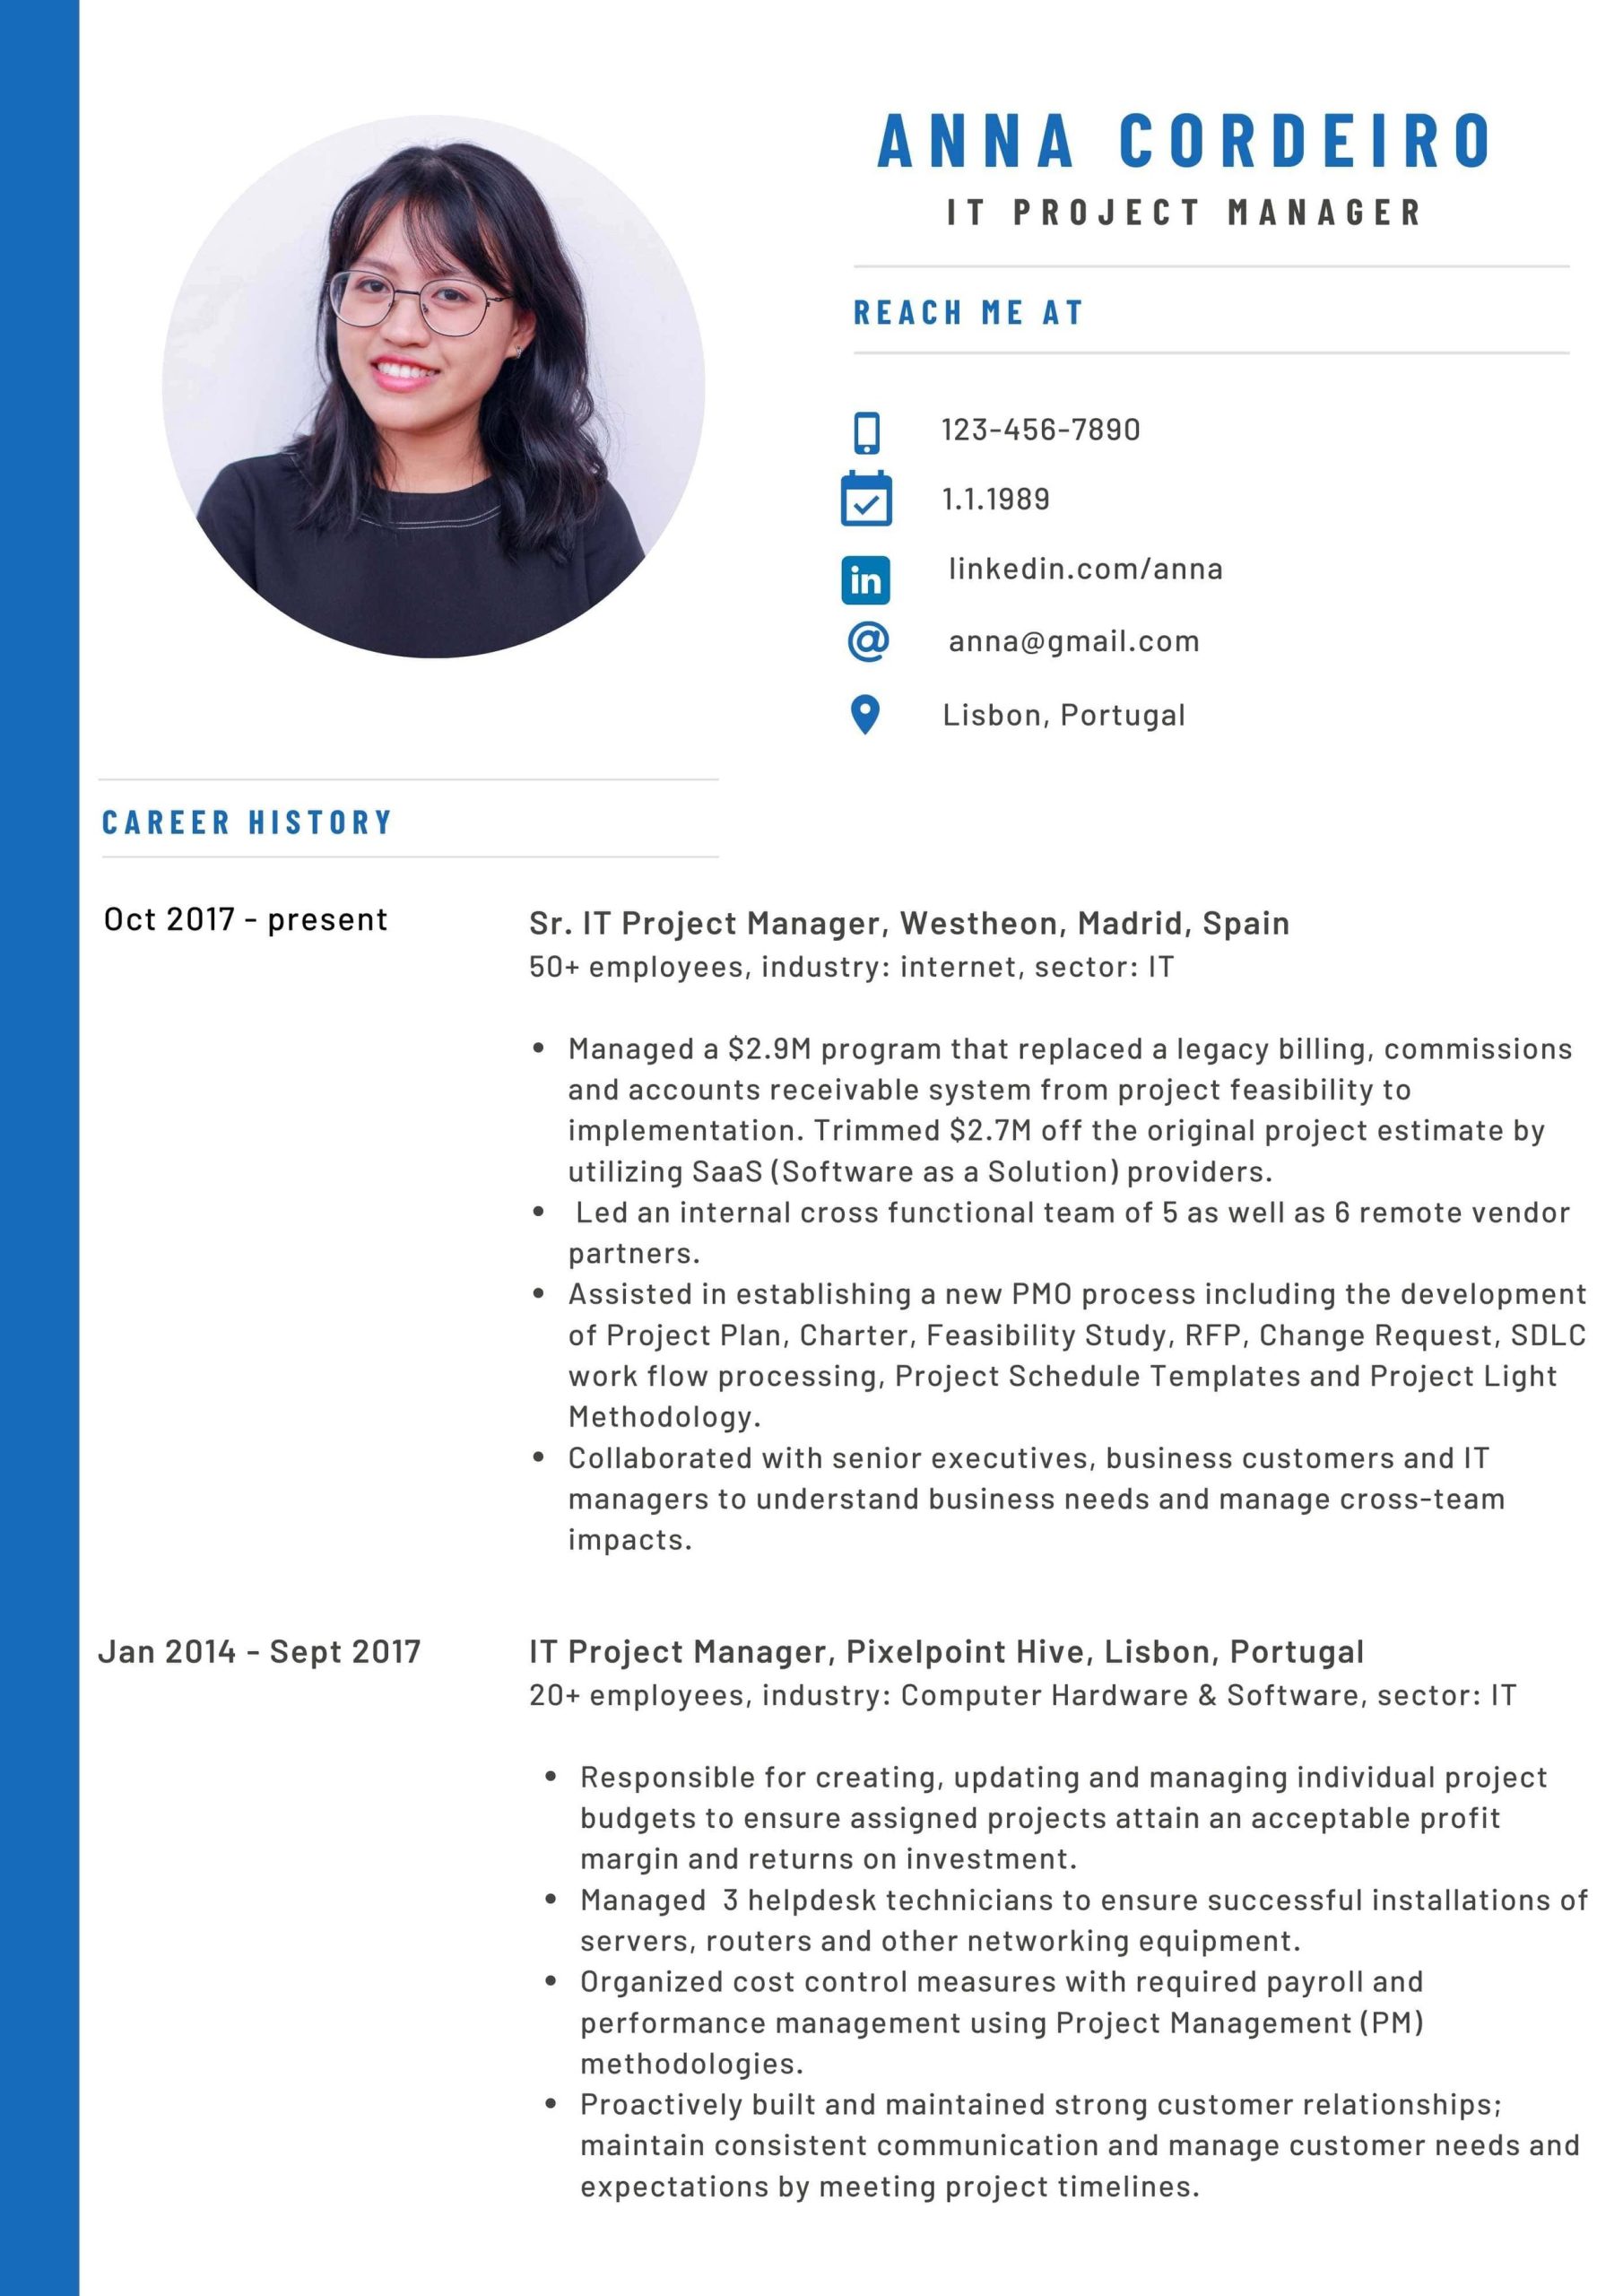 Sample Resume for Visa Recruiter Position How to Write A Cv or Lebenslauf In Germany â Hallogermany